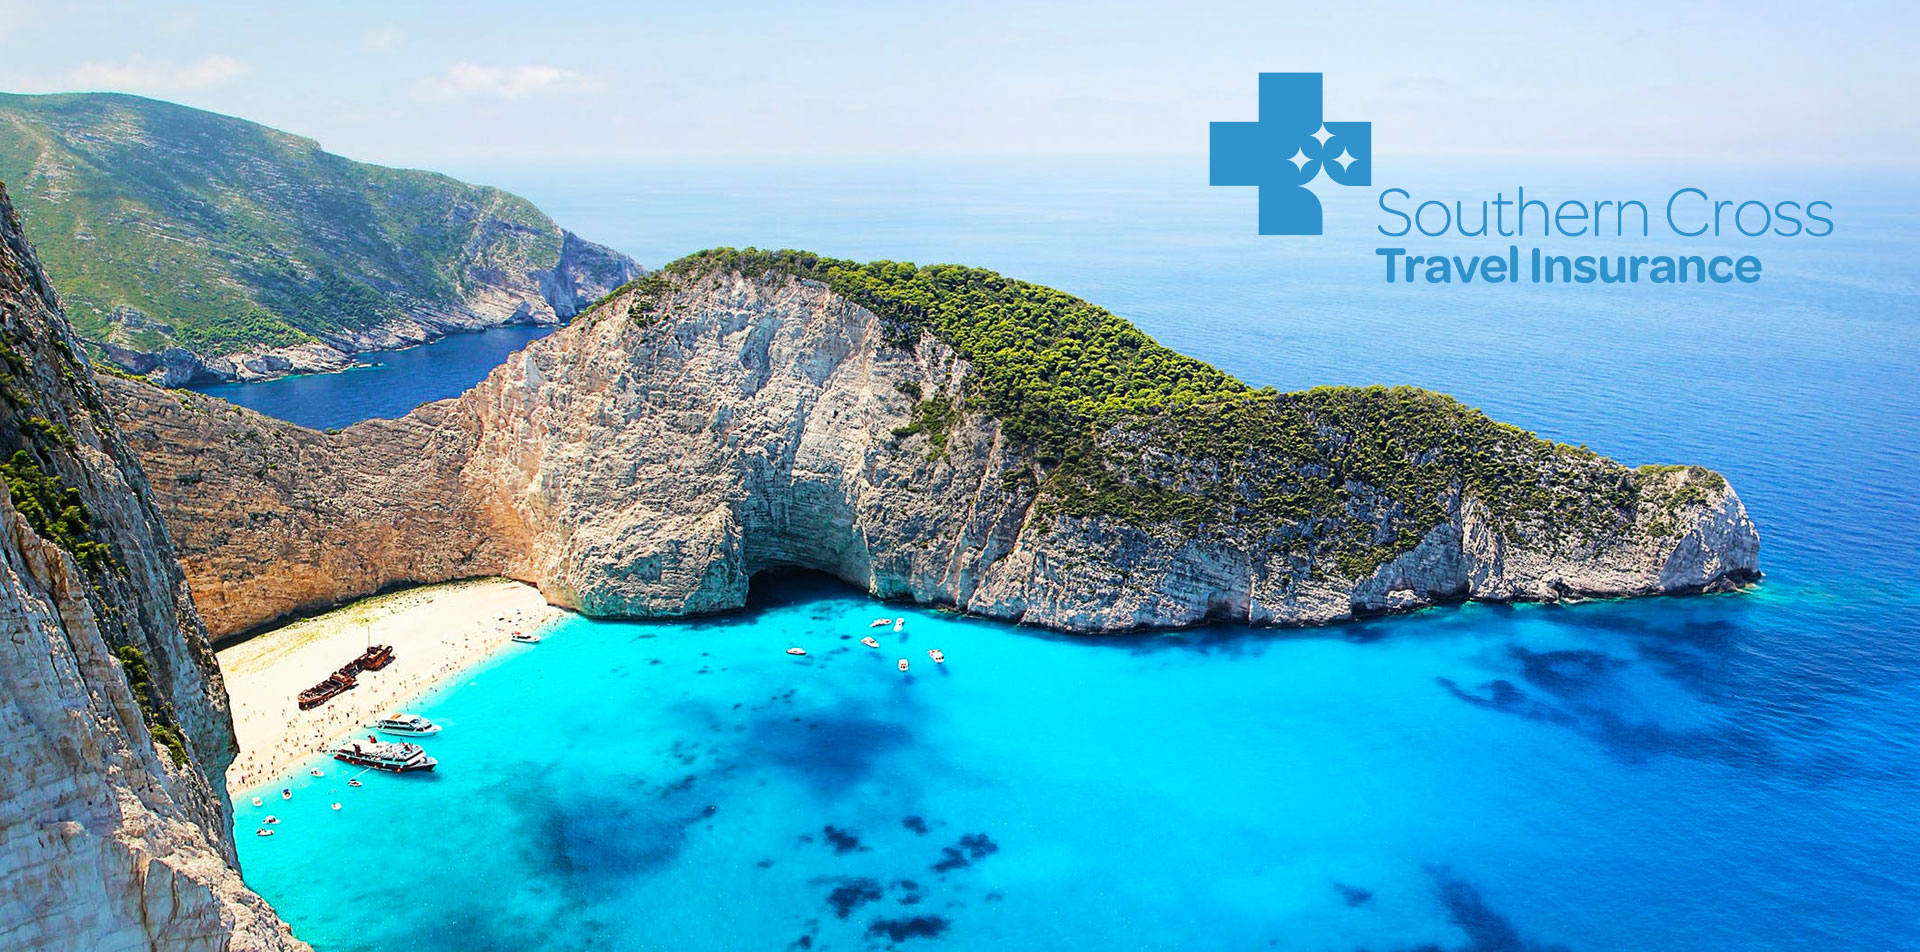 Southern cross travel insurance case study - photo of a coastline with large rock forms and turquoise blue sea.